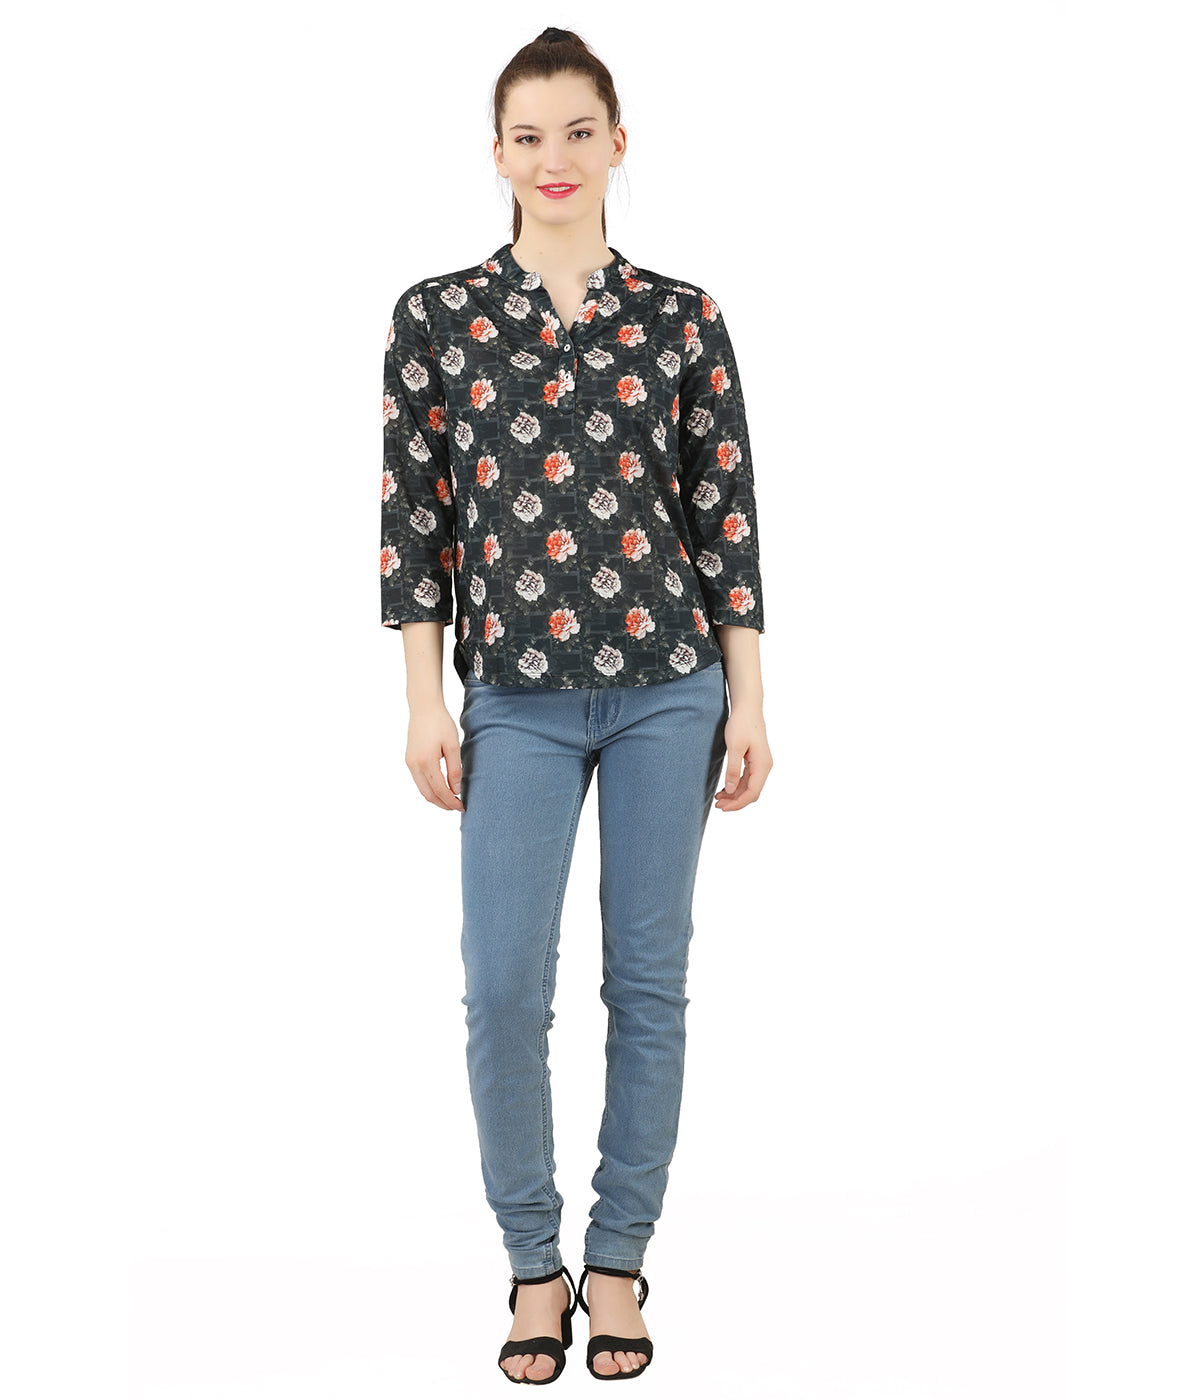 ERIKA (100% POLYESTER PRINTED TOP FOR WOMENS)